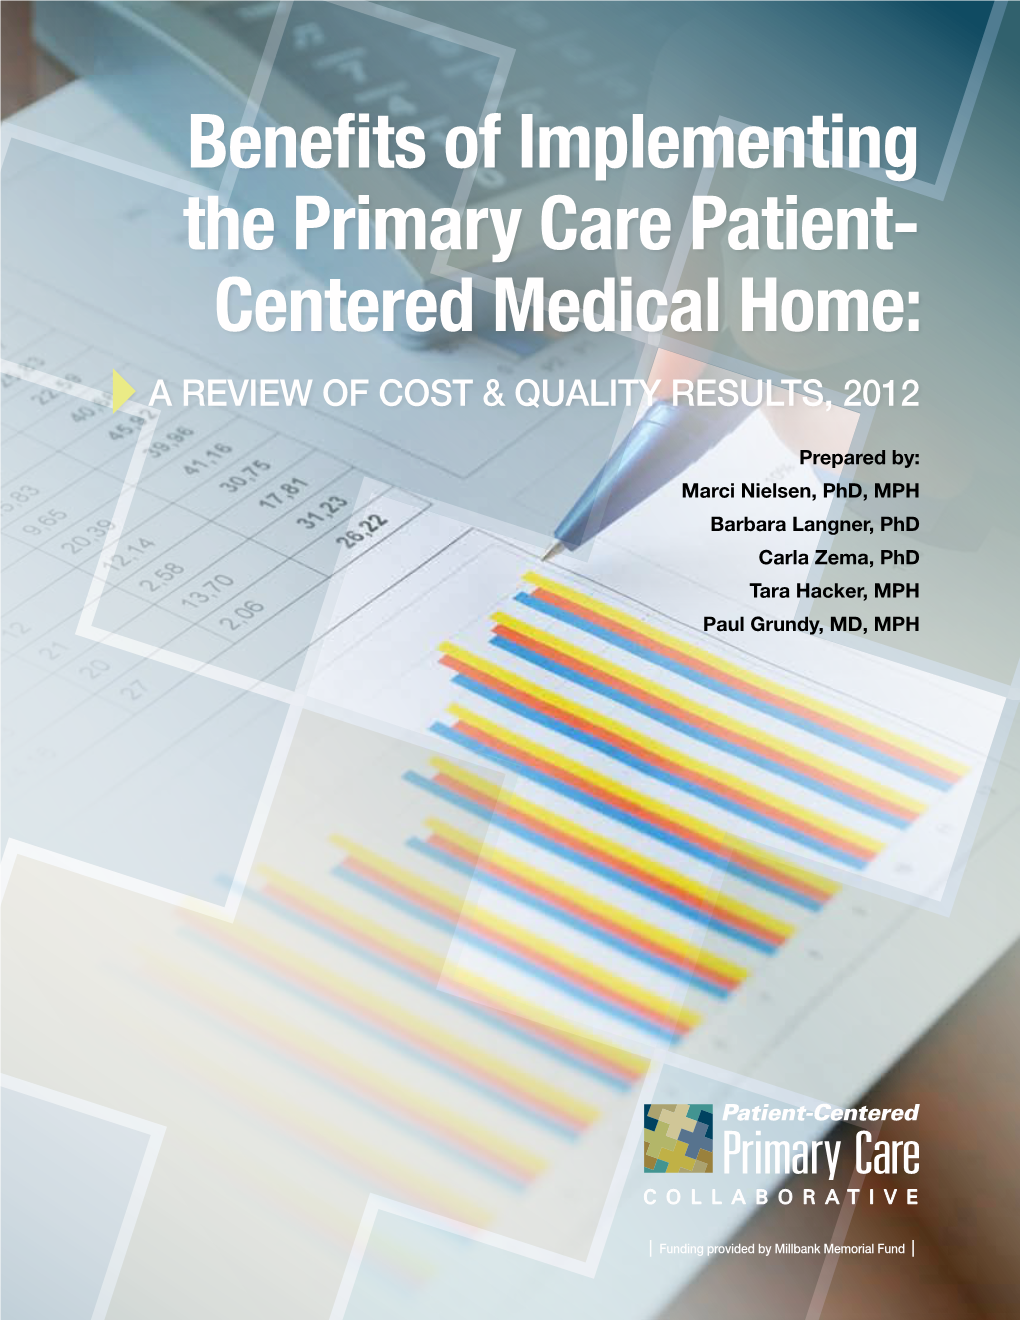 Benefits of Implementing the Primary Care Patient- Centered Medical Home